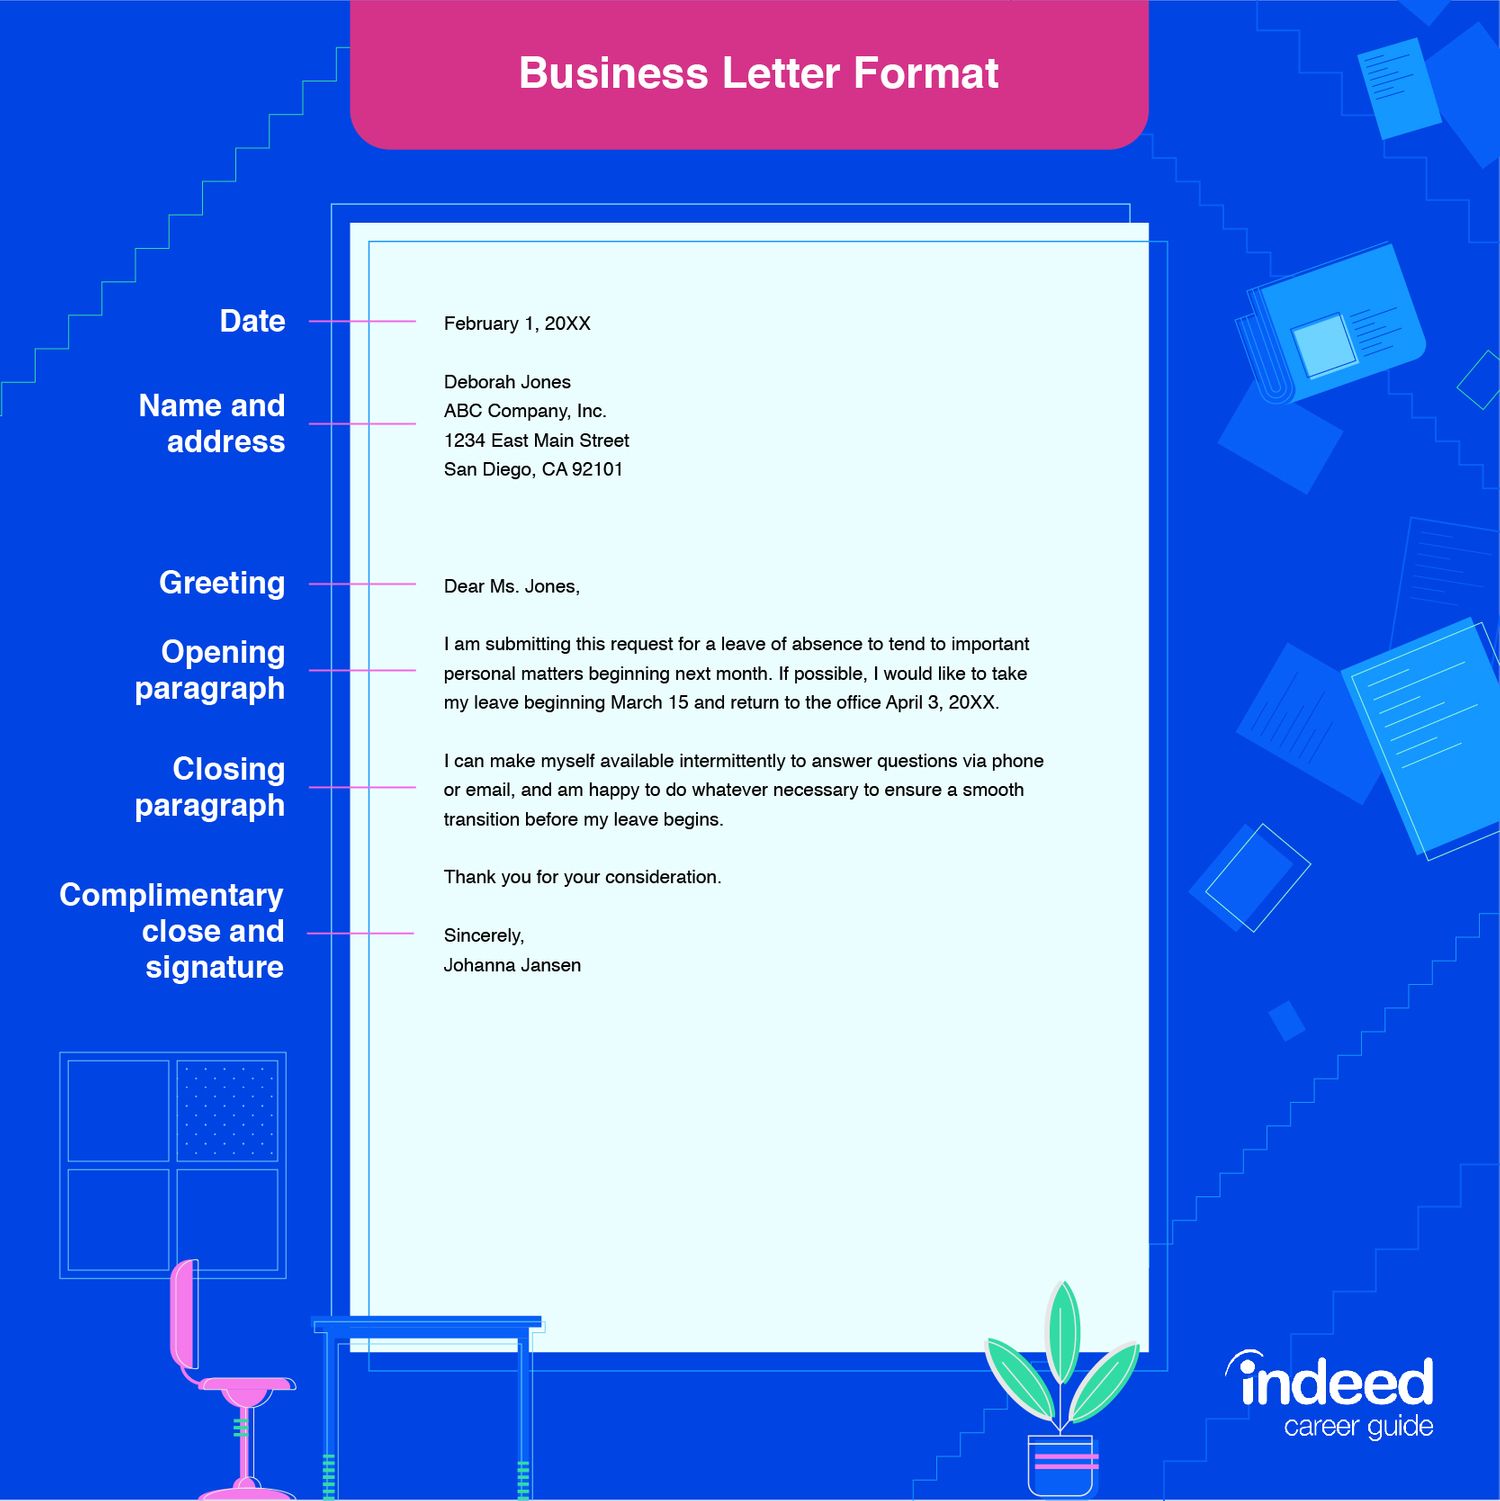 How do you greet in a formal letter?